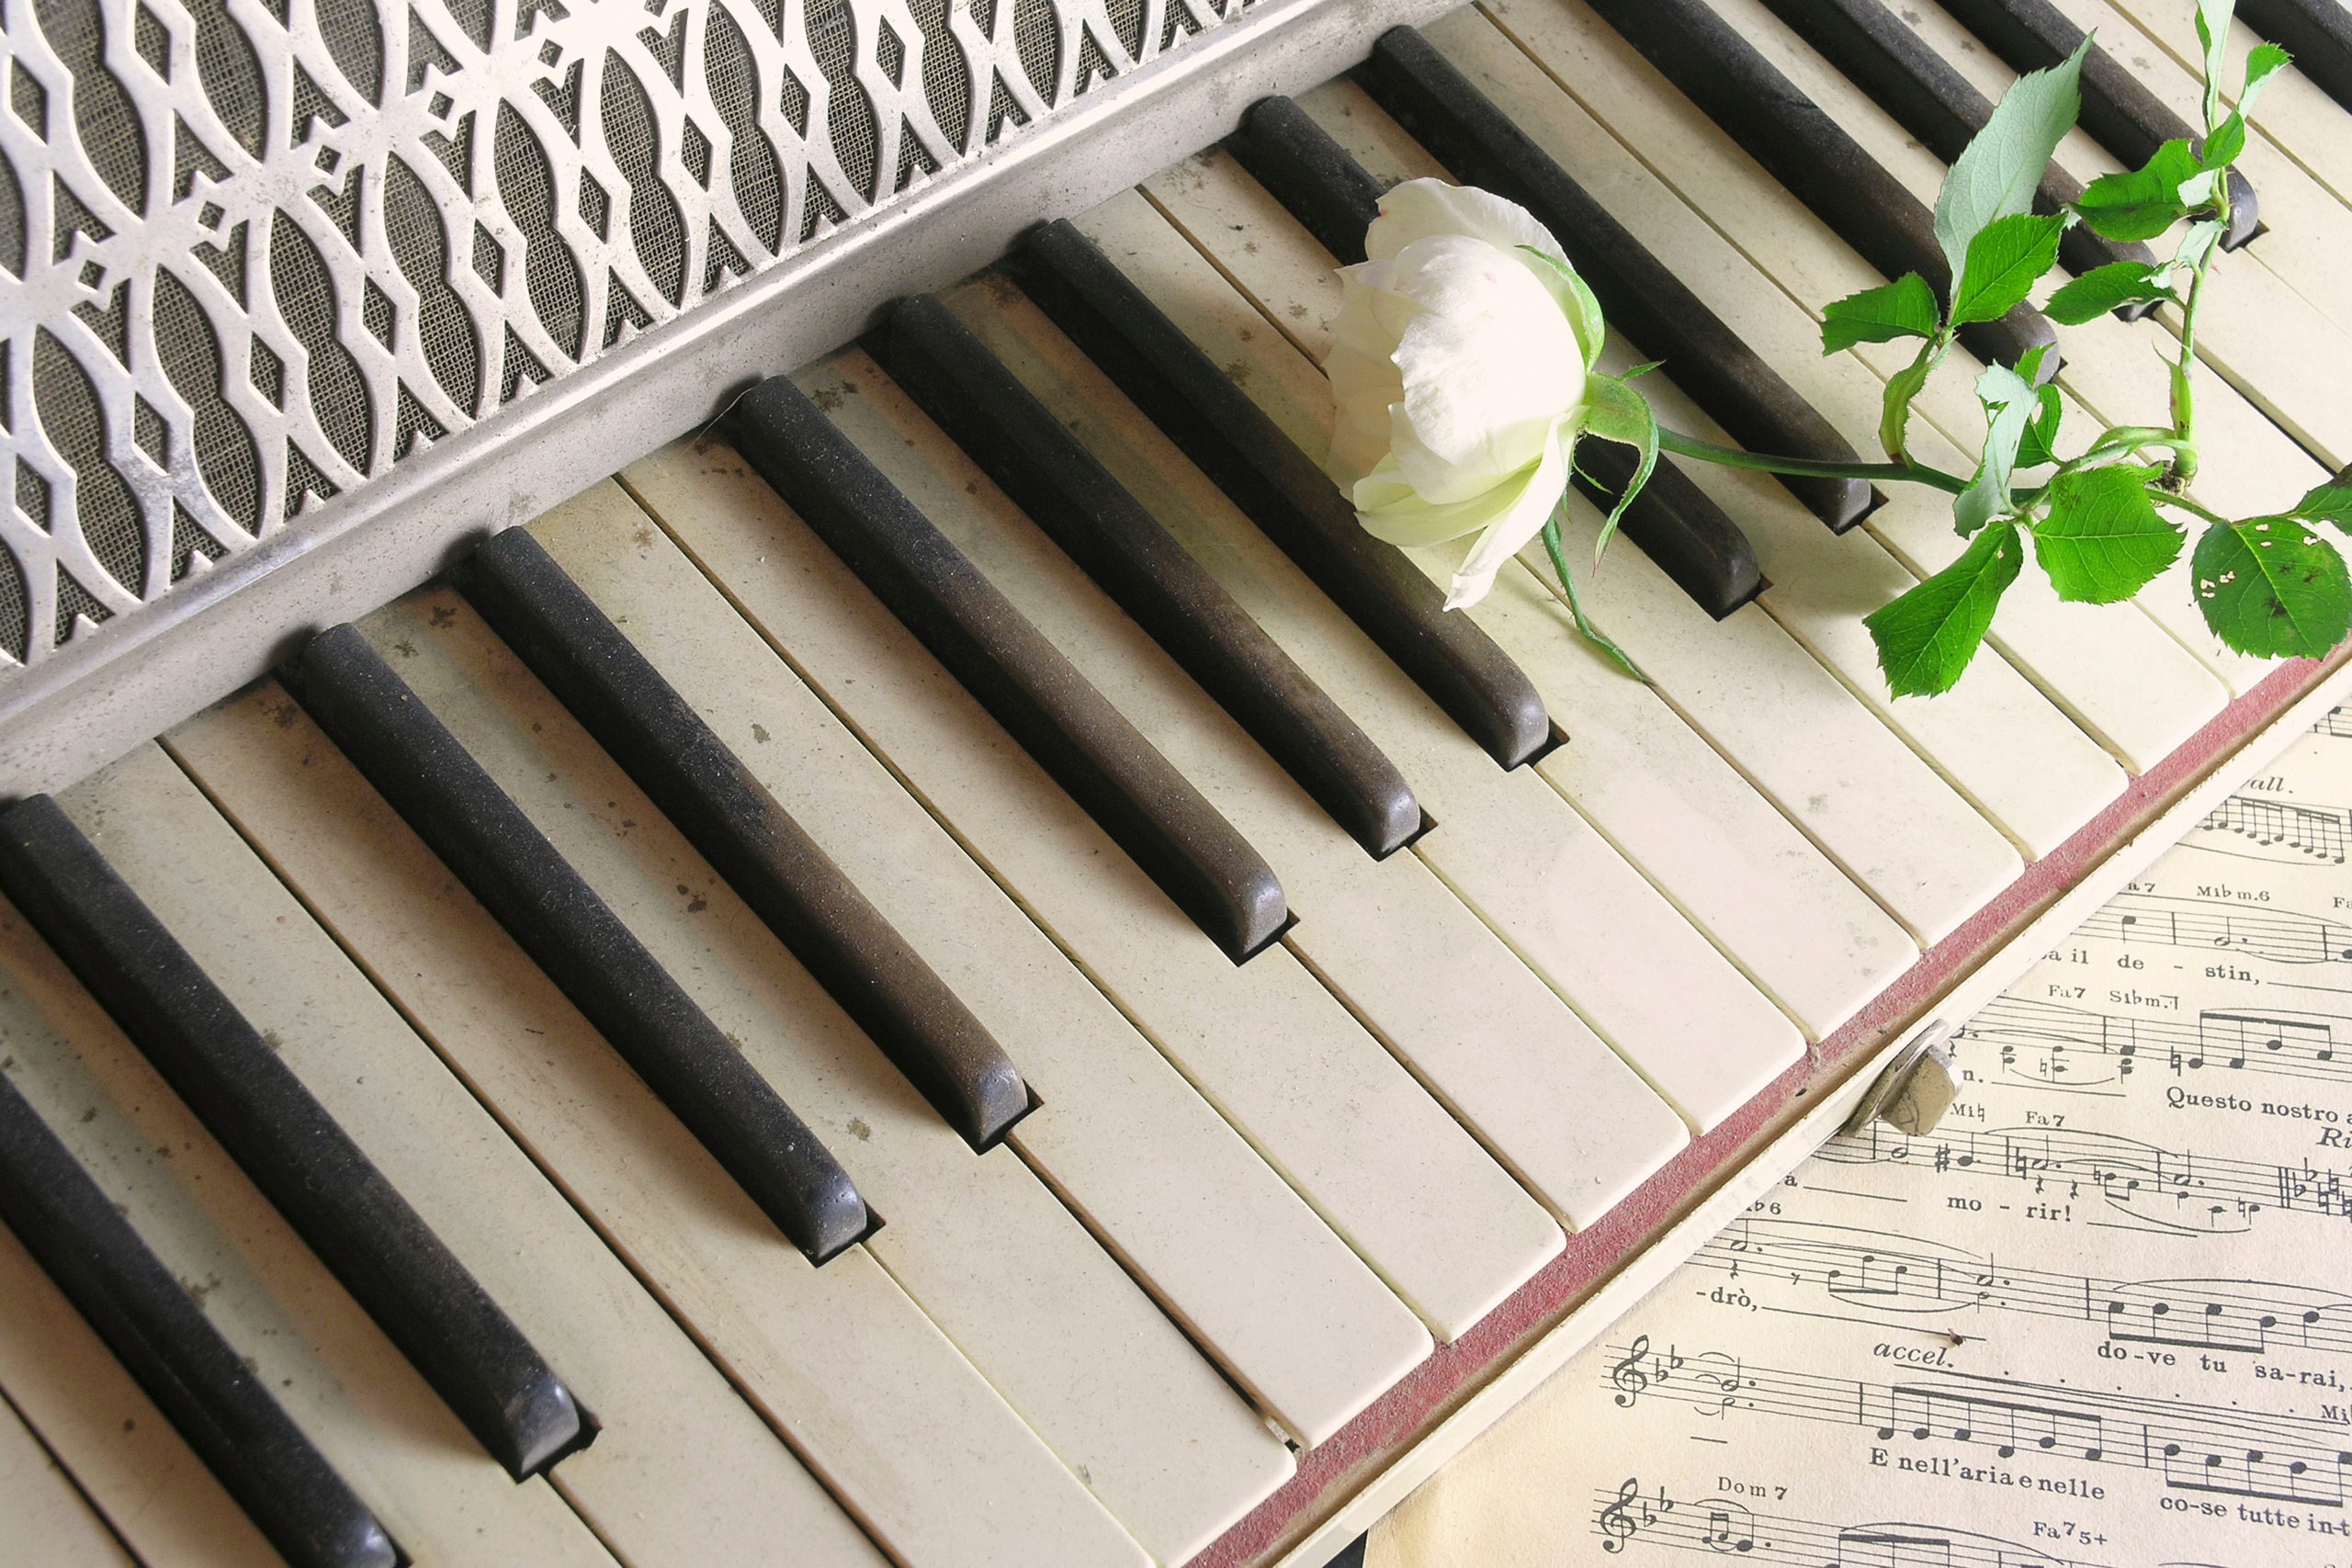 Piano keys and a white stem rose on top.